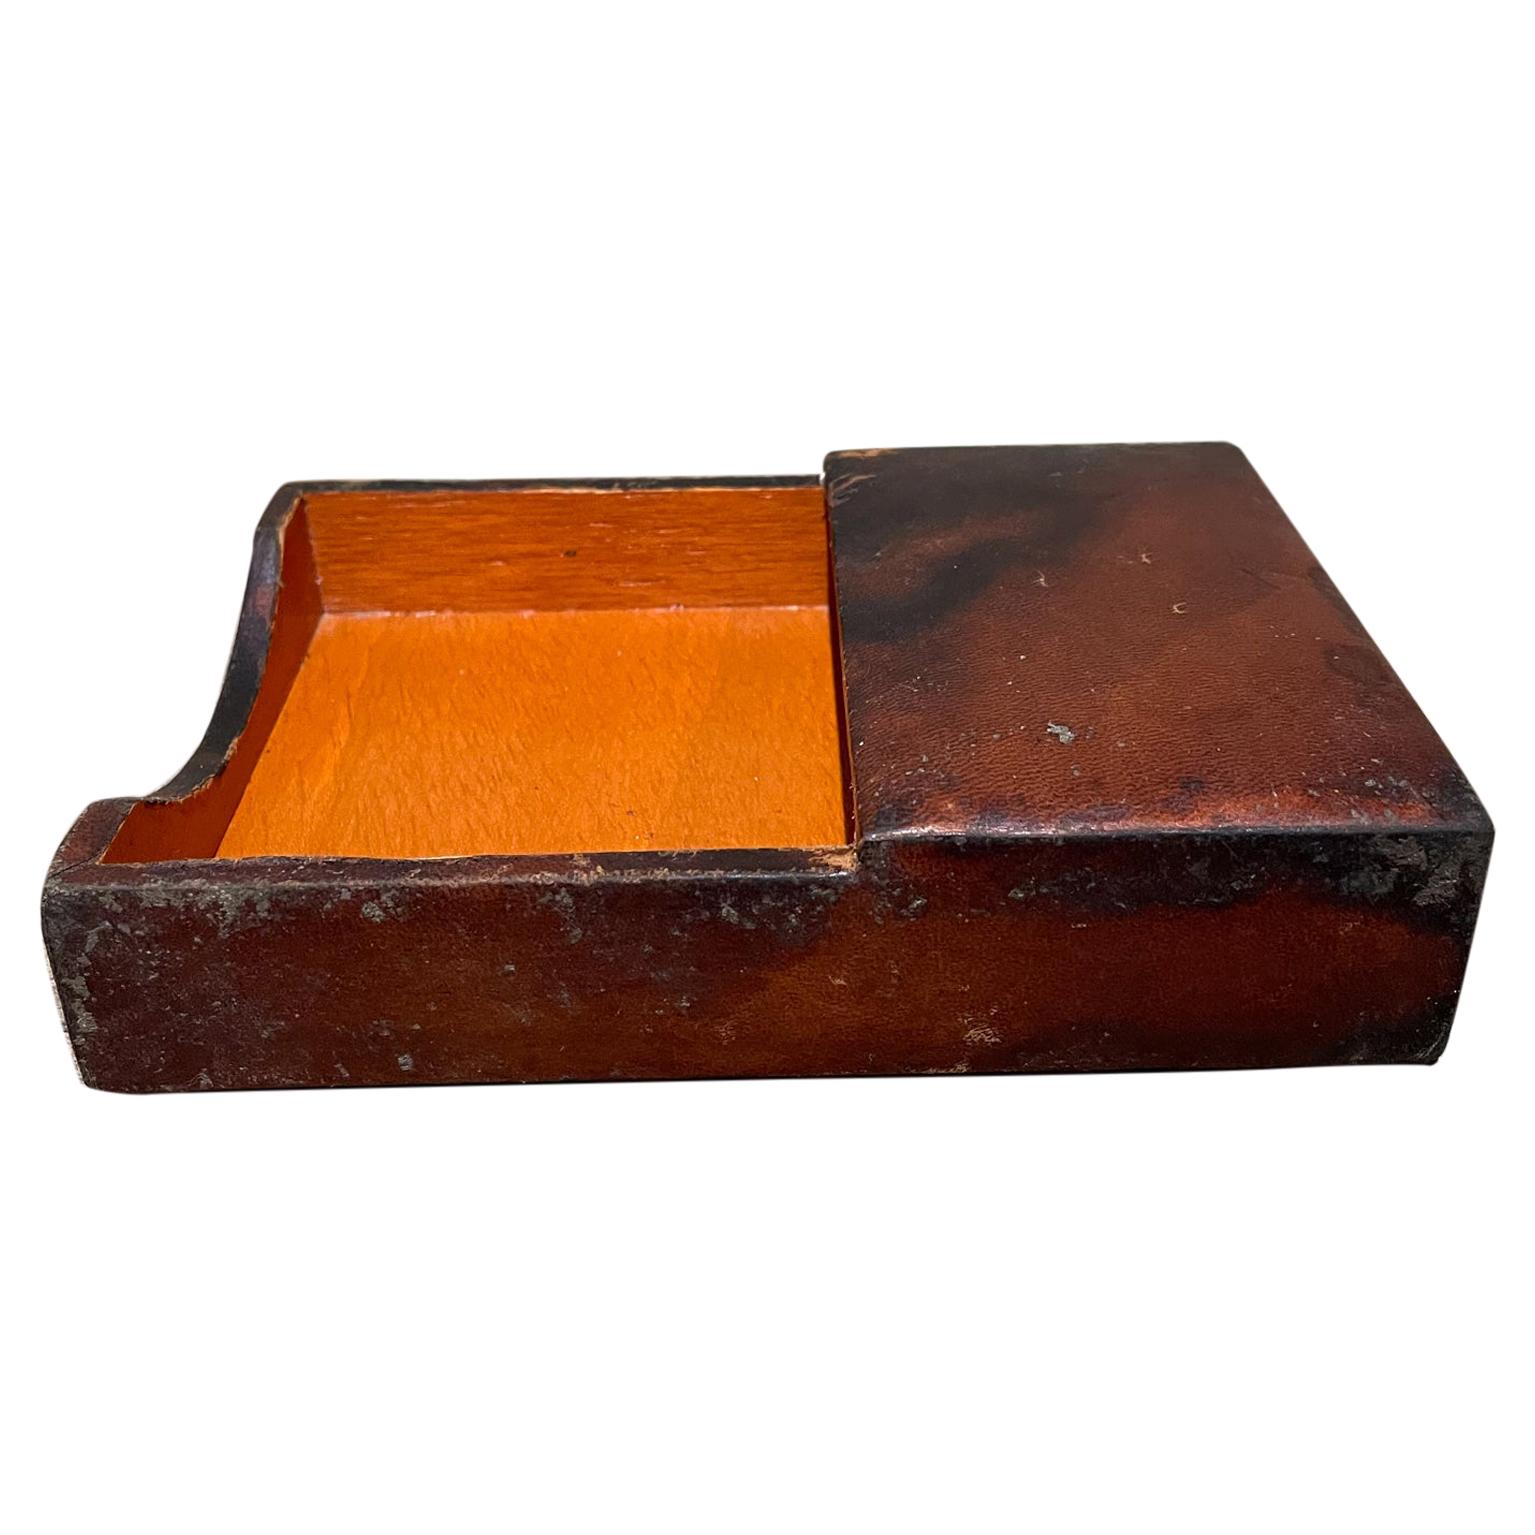 French style of Hermes leather wrapped wood memo note pad holder desk accessory vintage circa 1950s.
Unmarked.
 7 L x 4.75 W x 1.5 tall
Original unrestored patinated condition preowned with vintage use and wear. Tons of charm.
 